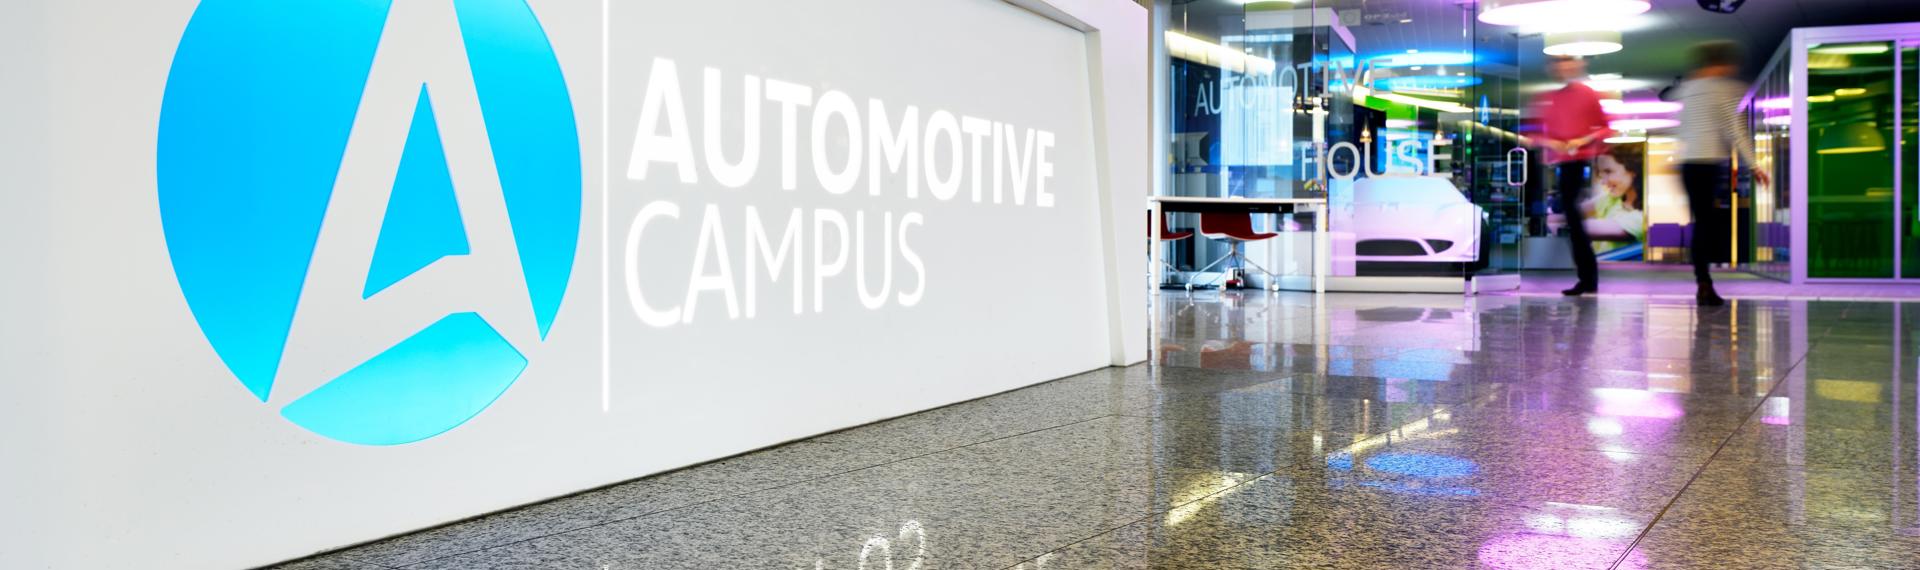 The Automotive Campus in Helmond is a breeding ground for innovations in the mobility field